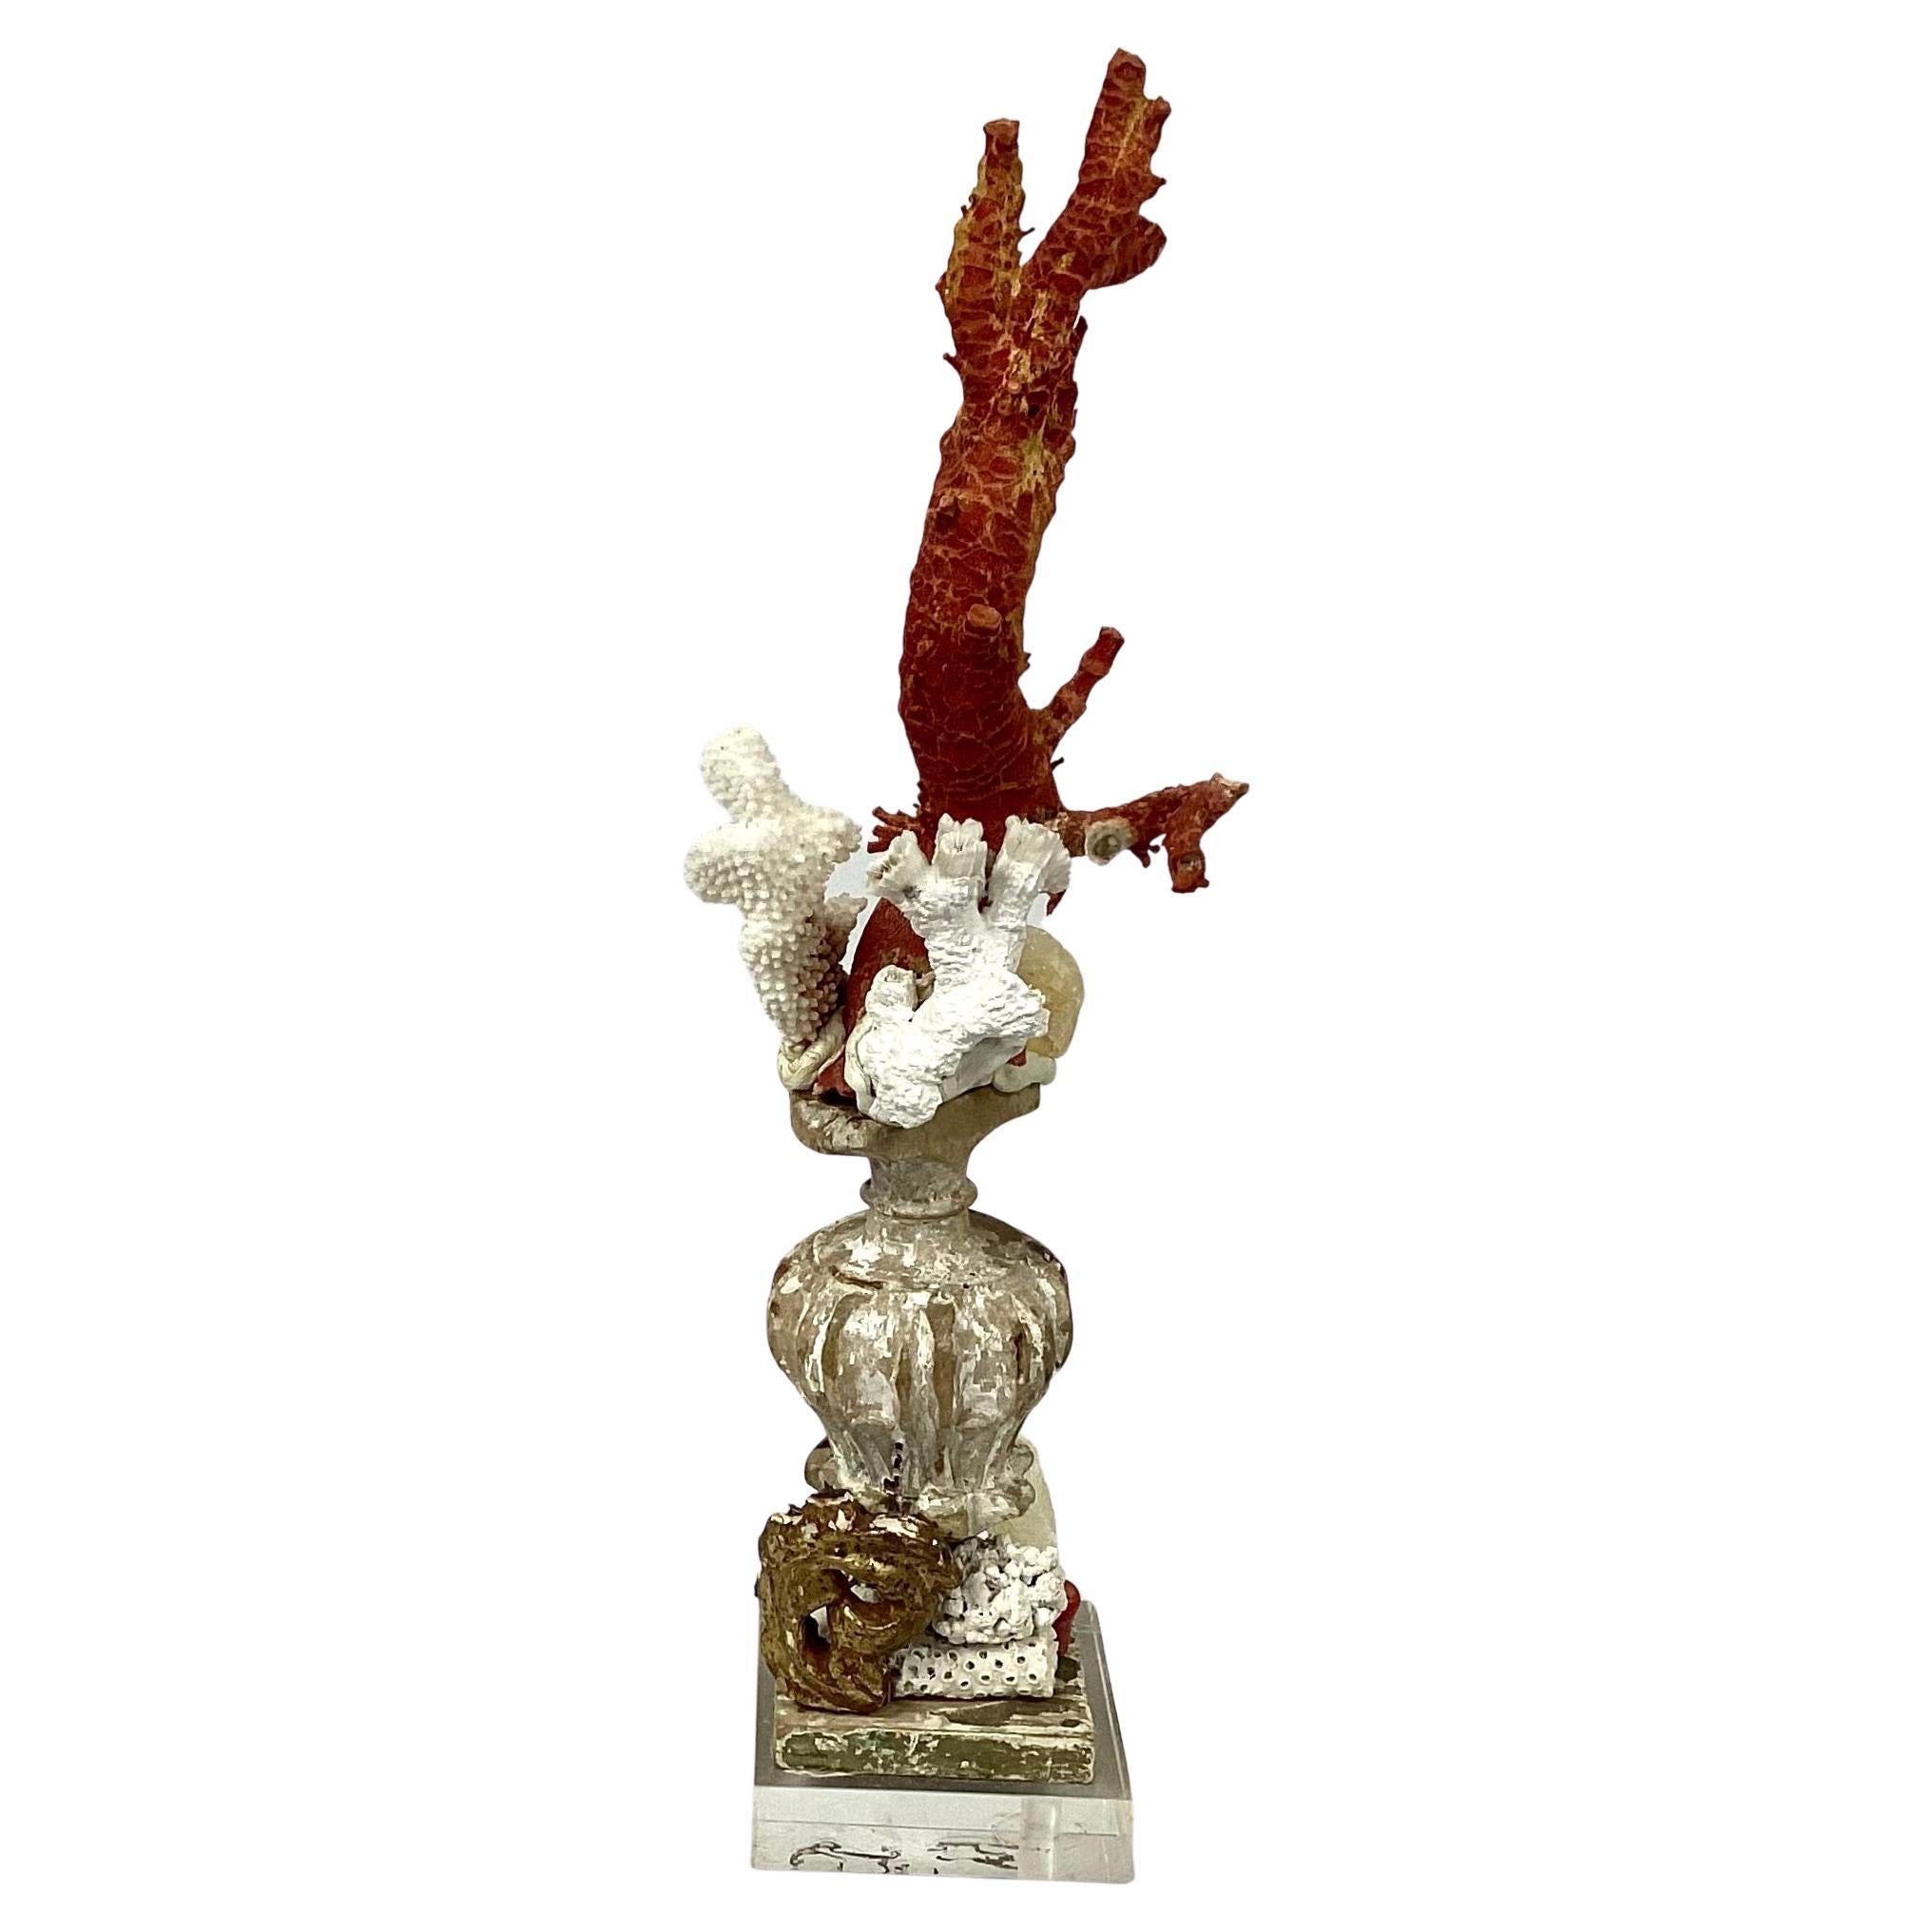 A hand-crafted sculpture specimen of natural white and red coral branches mounted on 18th century wood fragment and square lucite base.